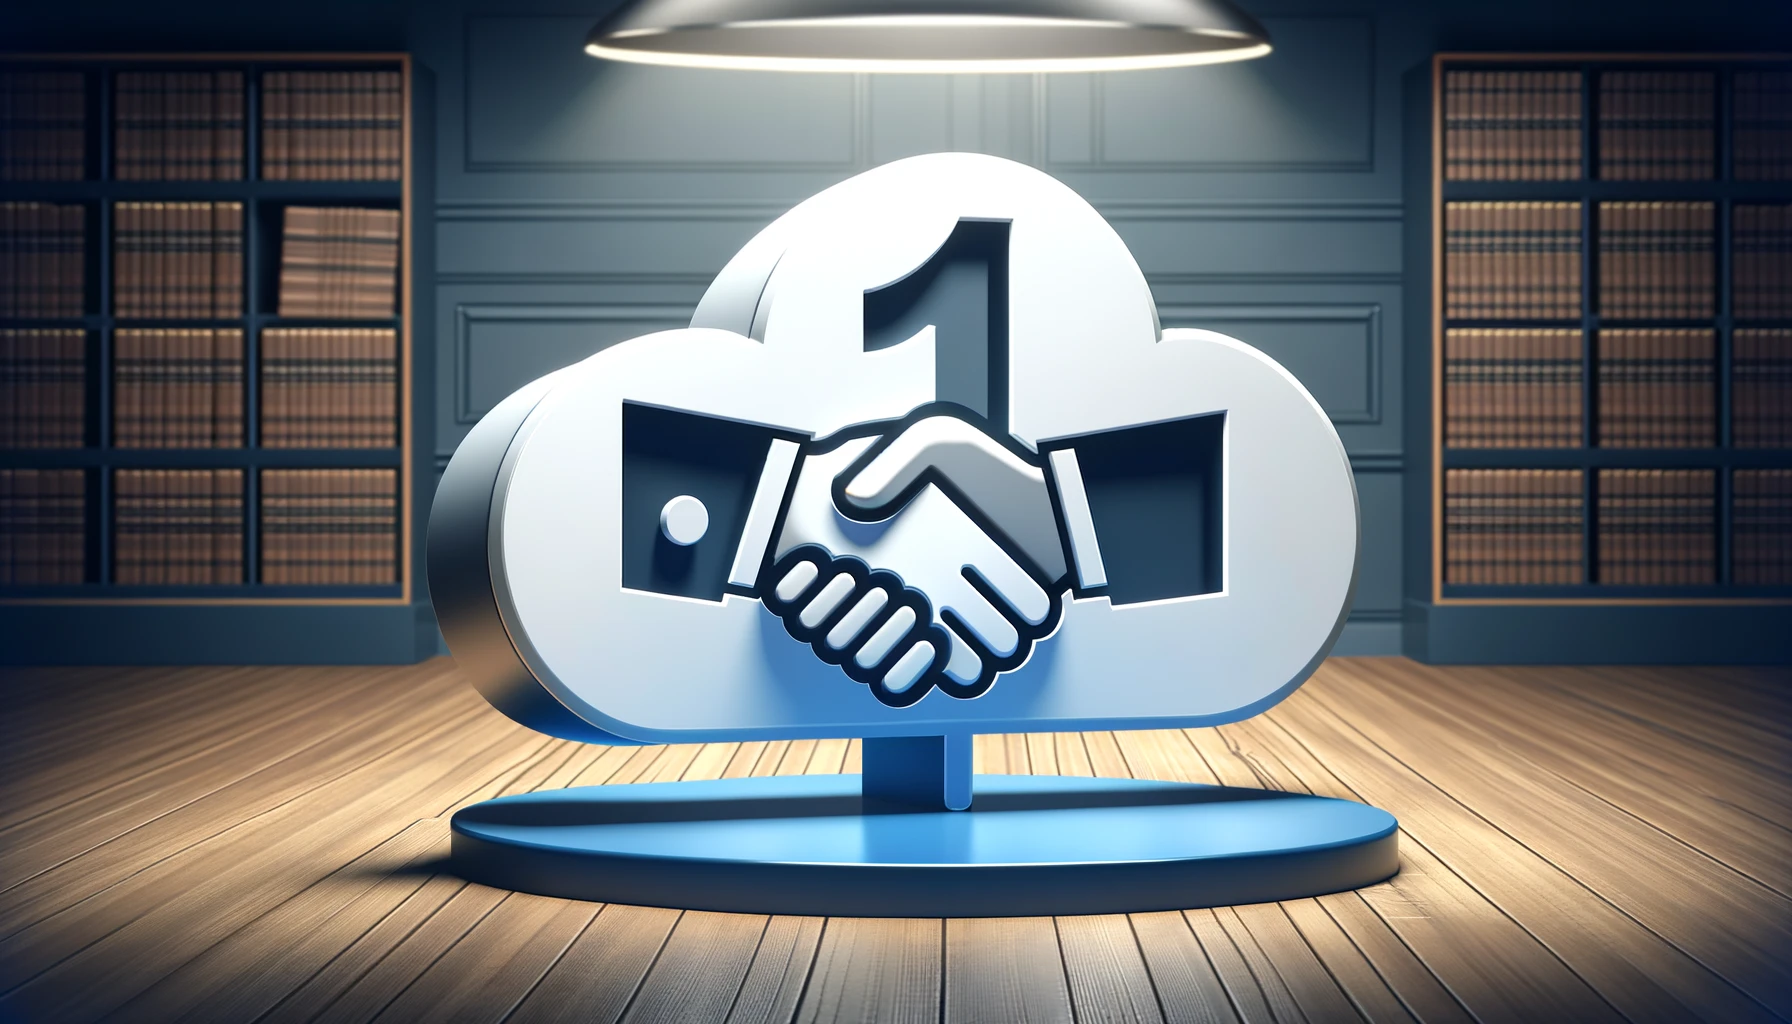 SentinelOne finalizes purchase of SG cloud security startup